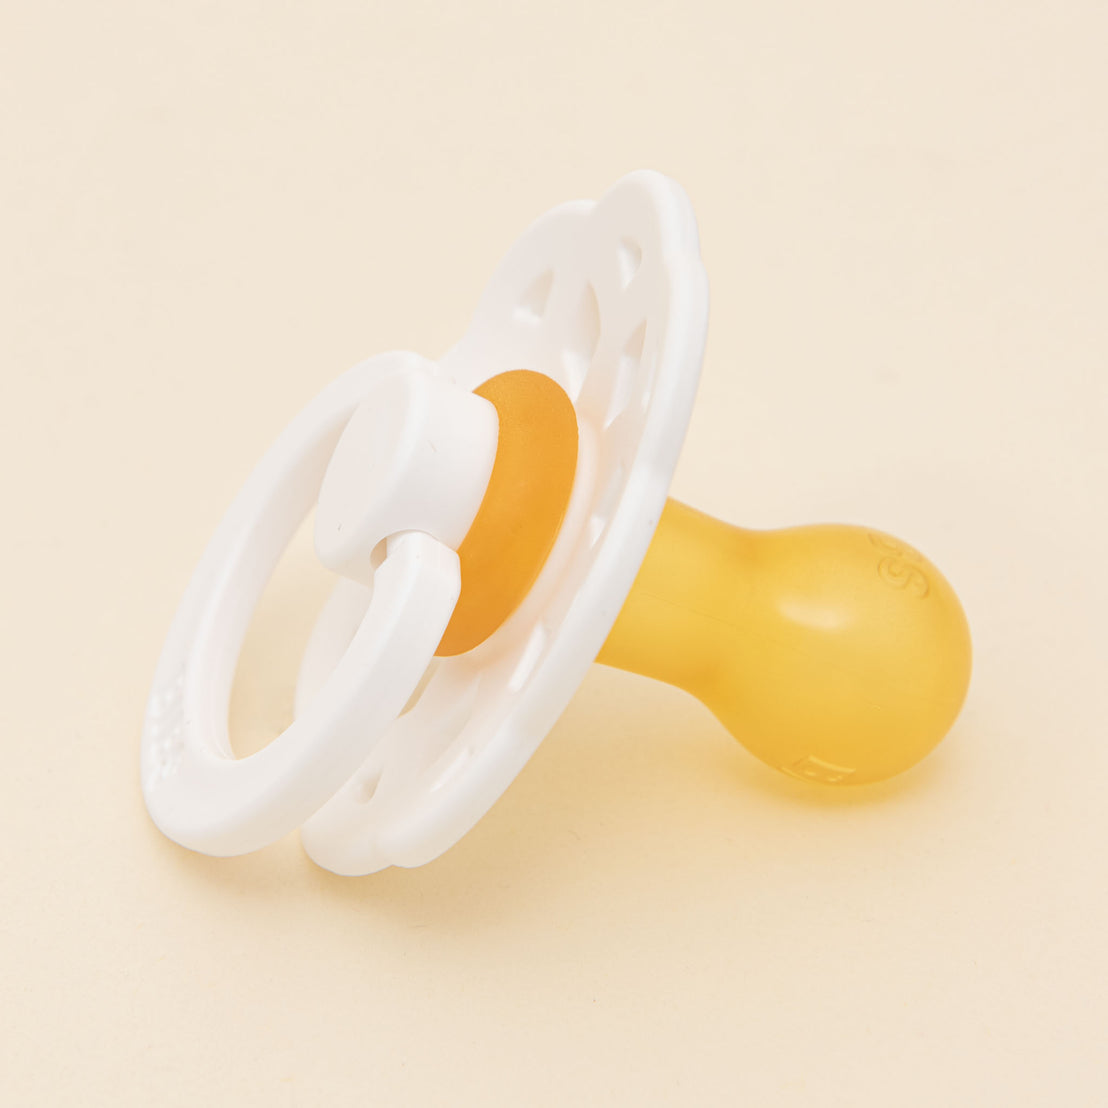 A Bibs Lace Pacifier 2 Pack | White with a white and transparent shield and handle, and a yellow nipple, set against a light beige background.